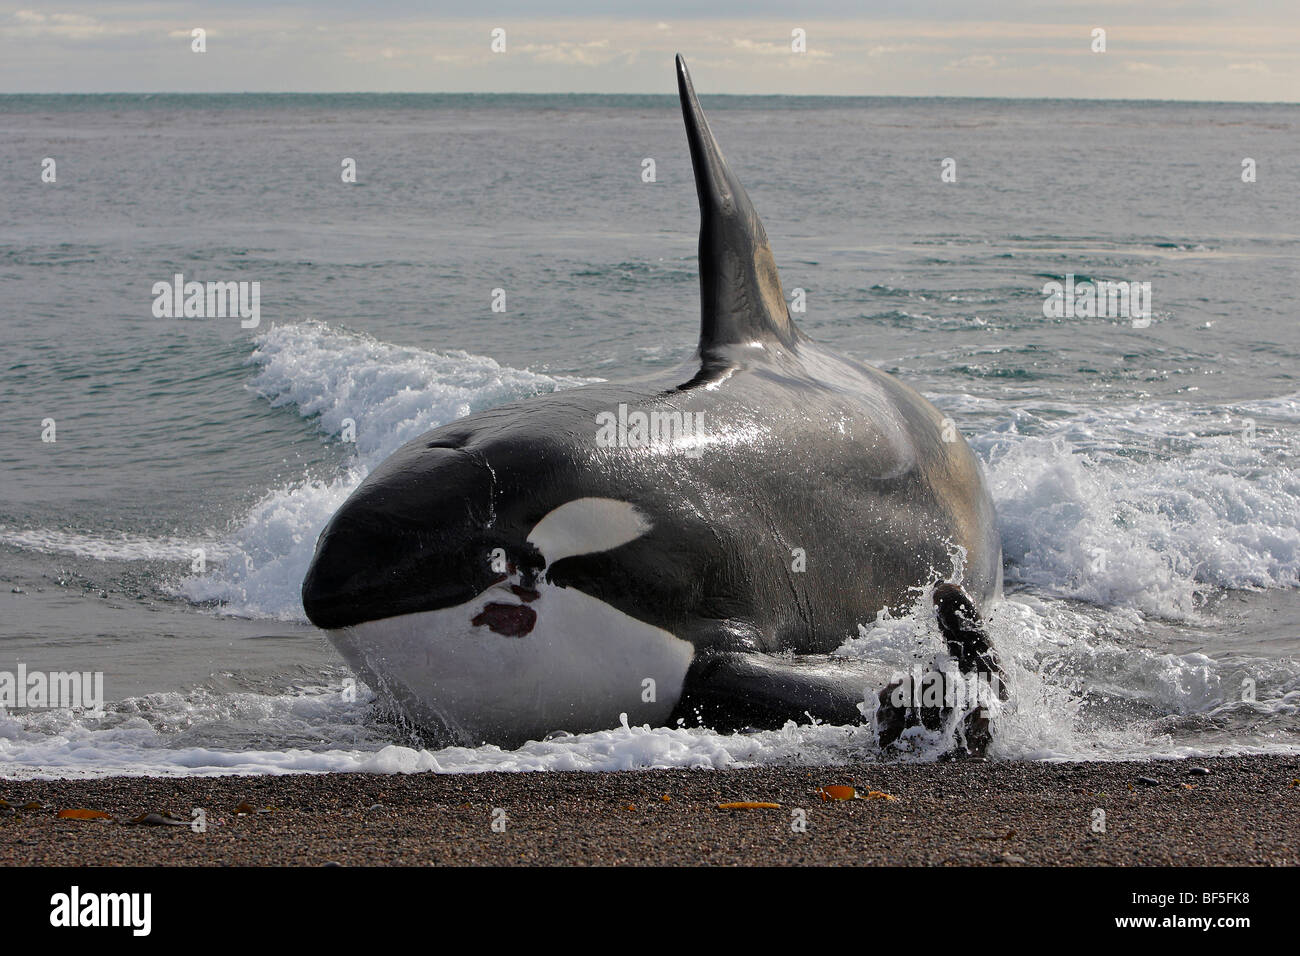 Orca Whale (Orcinus orca). Male attacking a young Southern Sea Lion (Otaria flavescens, Otaria byronia) on the beach Stock Photo